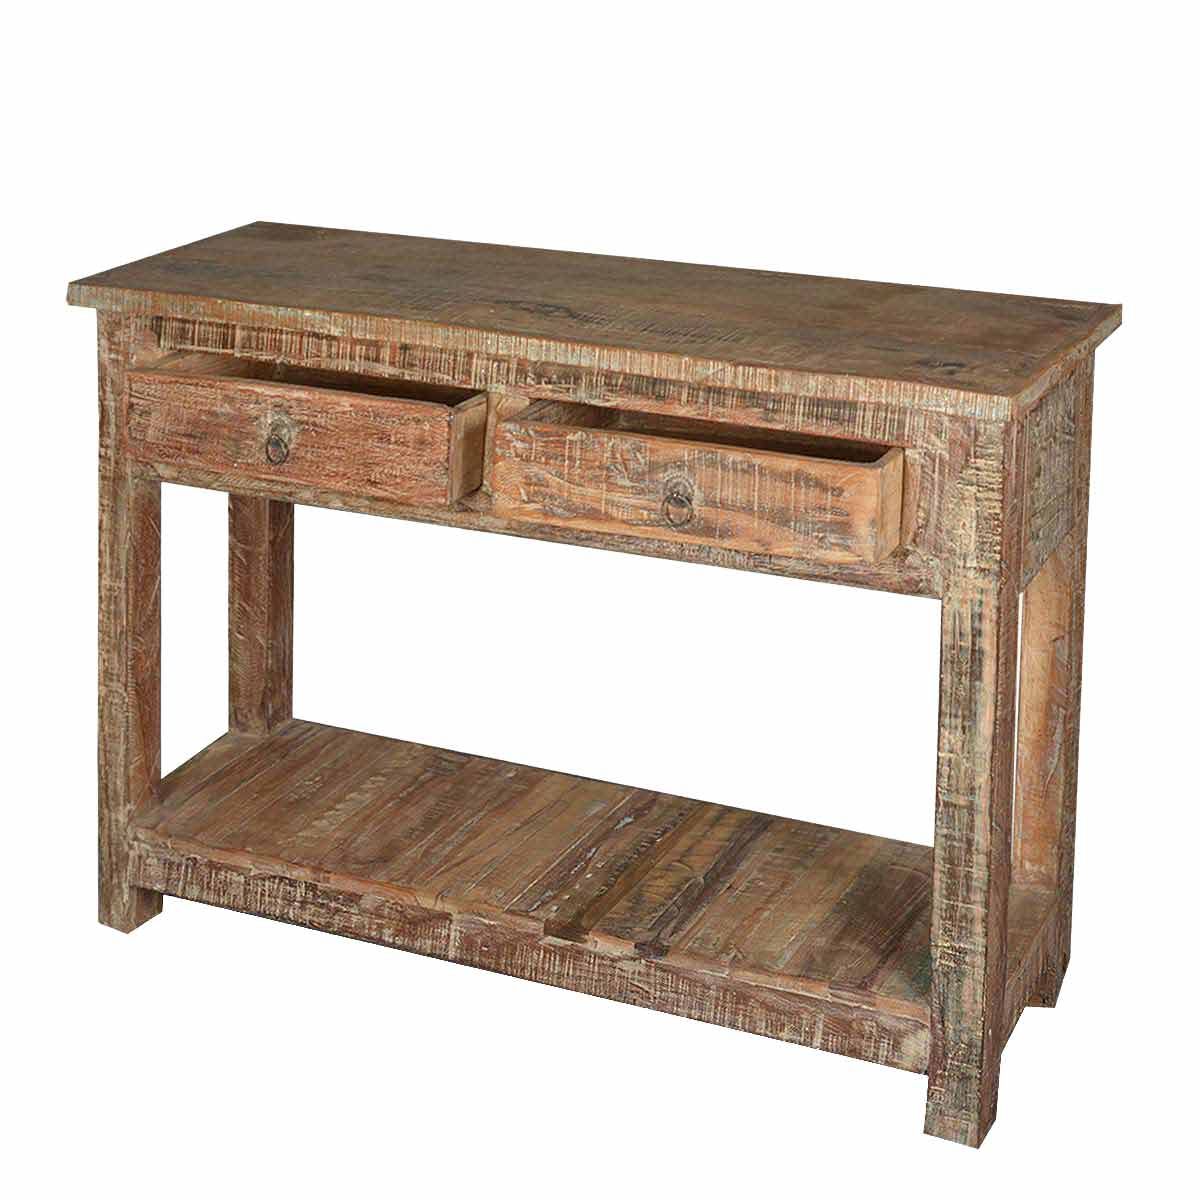 Rustic Reclaimed Wood Naturally Distressed Hall Console Table Intended For Rustic Espresso Wood Console Tables (View 2 of 20)